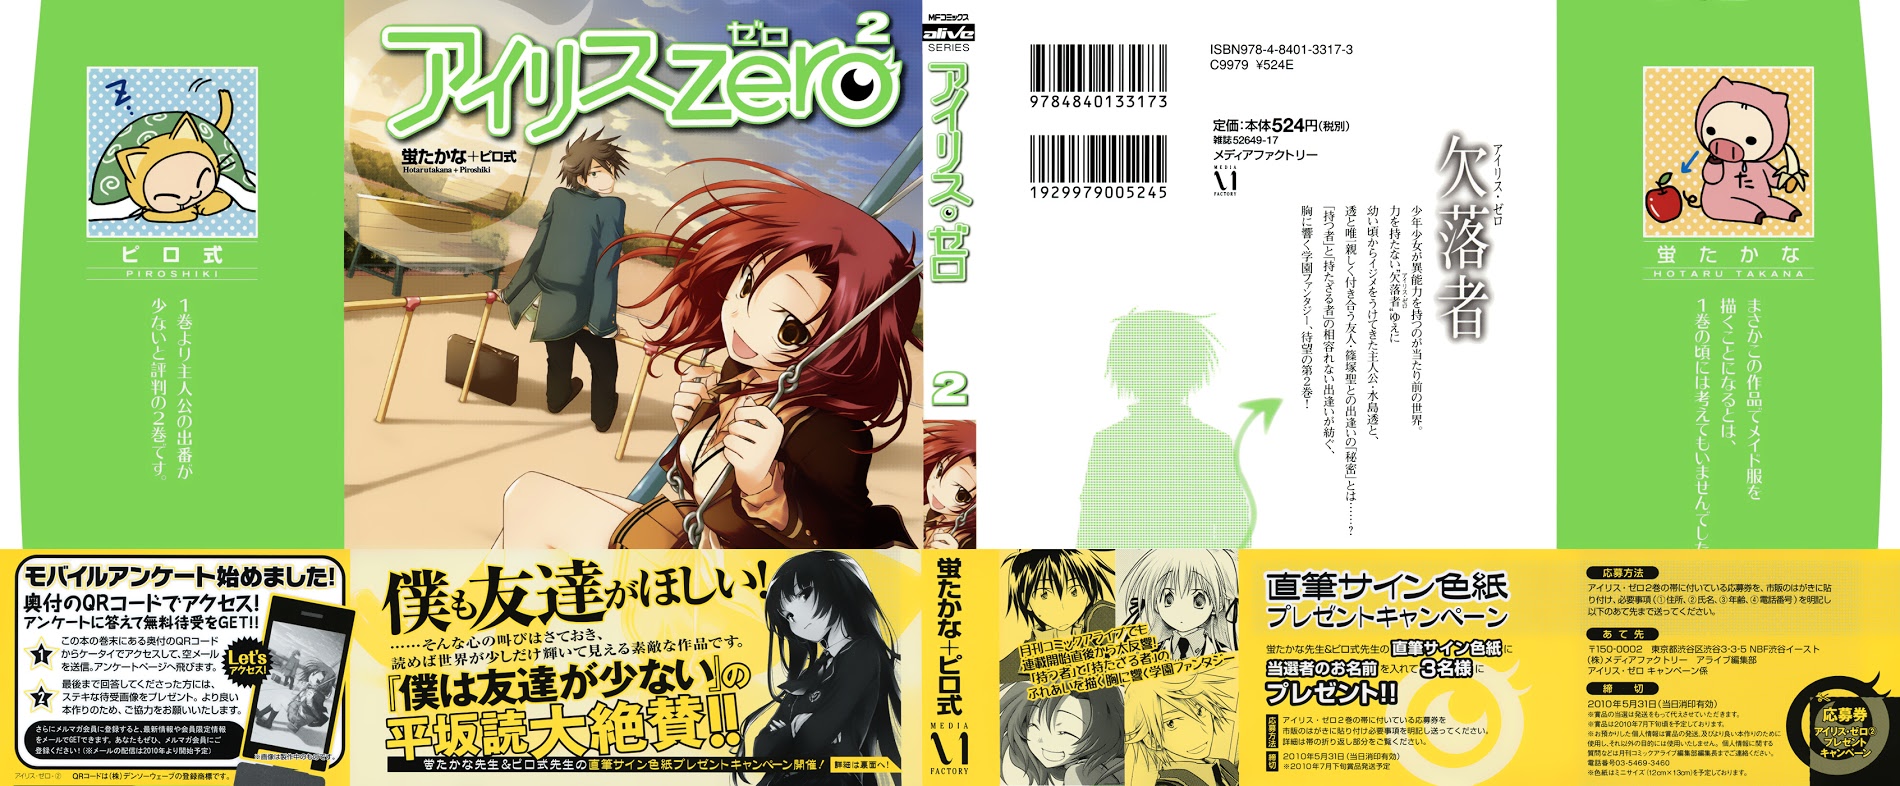 Iris Zero Vol.2 Chapter 5 : Episode 5 - The One Who Sees Fate - Picture 2